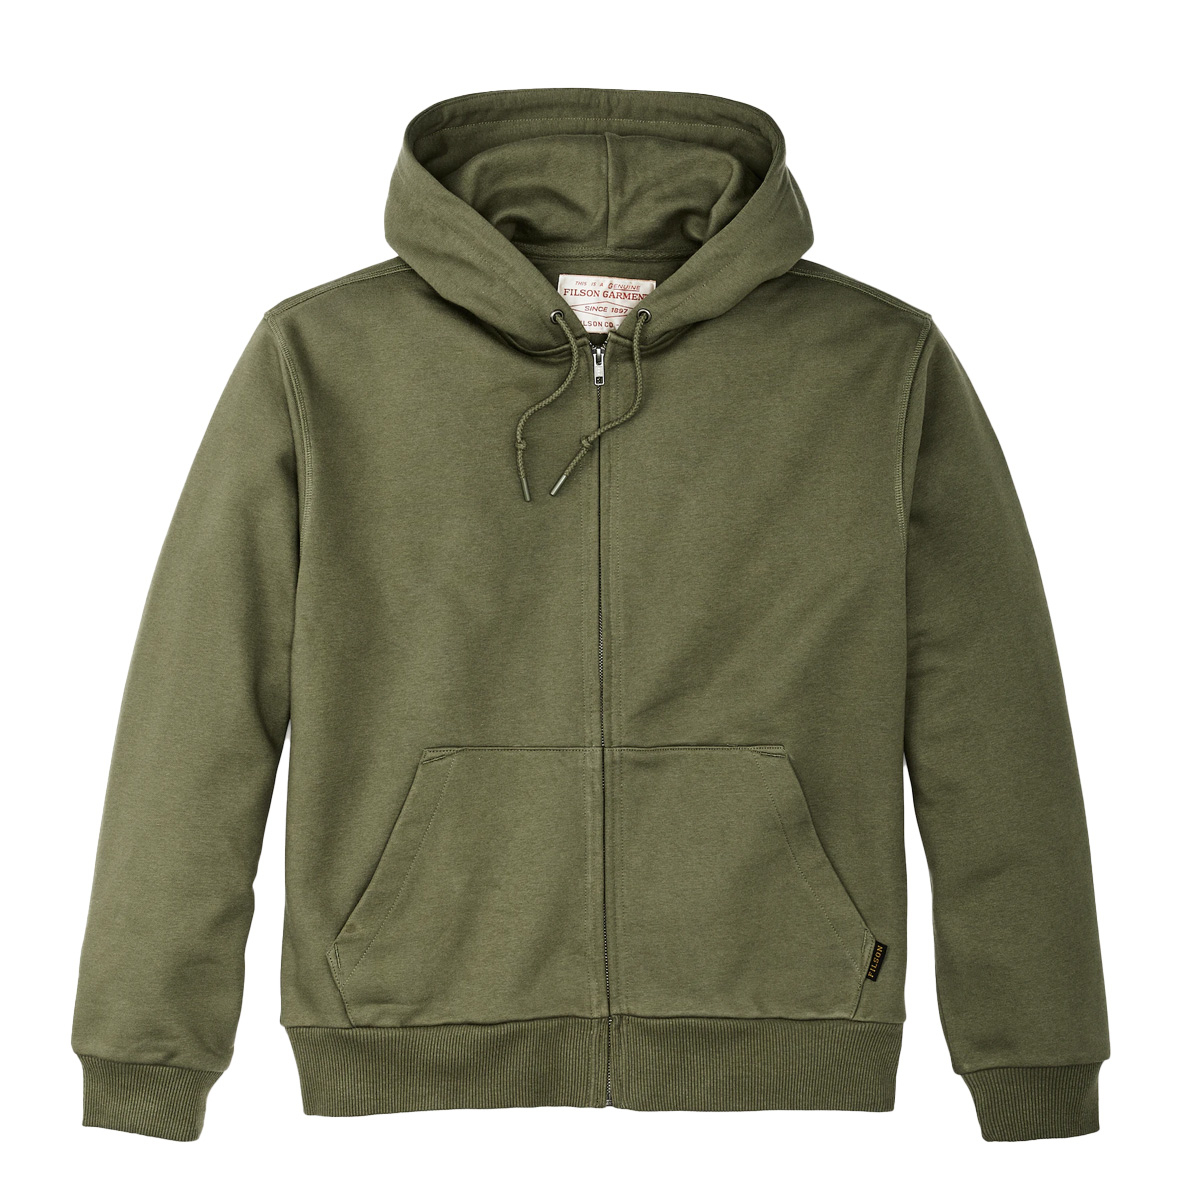 Filson Prospector Full Zip Hoodie Olive Drab, warm pullover that makes brisk days and cool evenings your favorite kind of weather